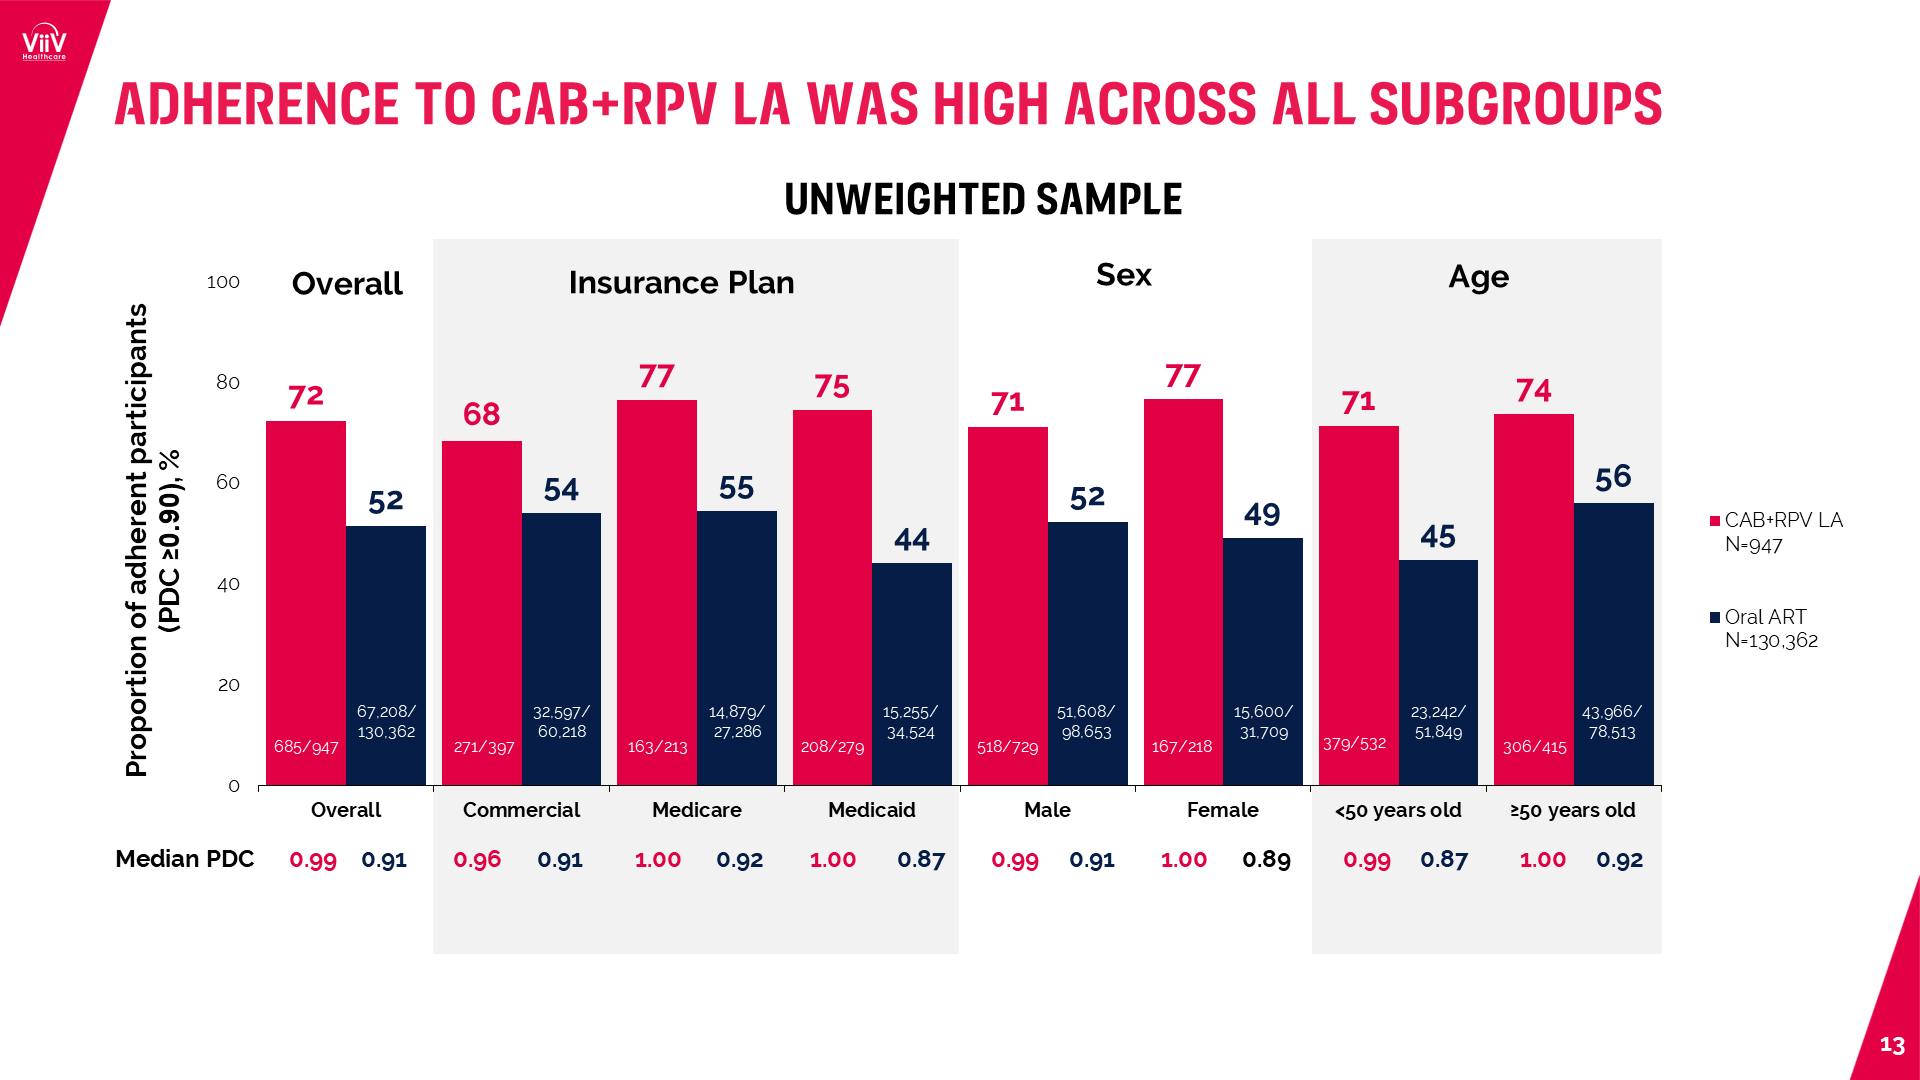 Adherence to CAB+RPV LA was high across all subgroups